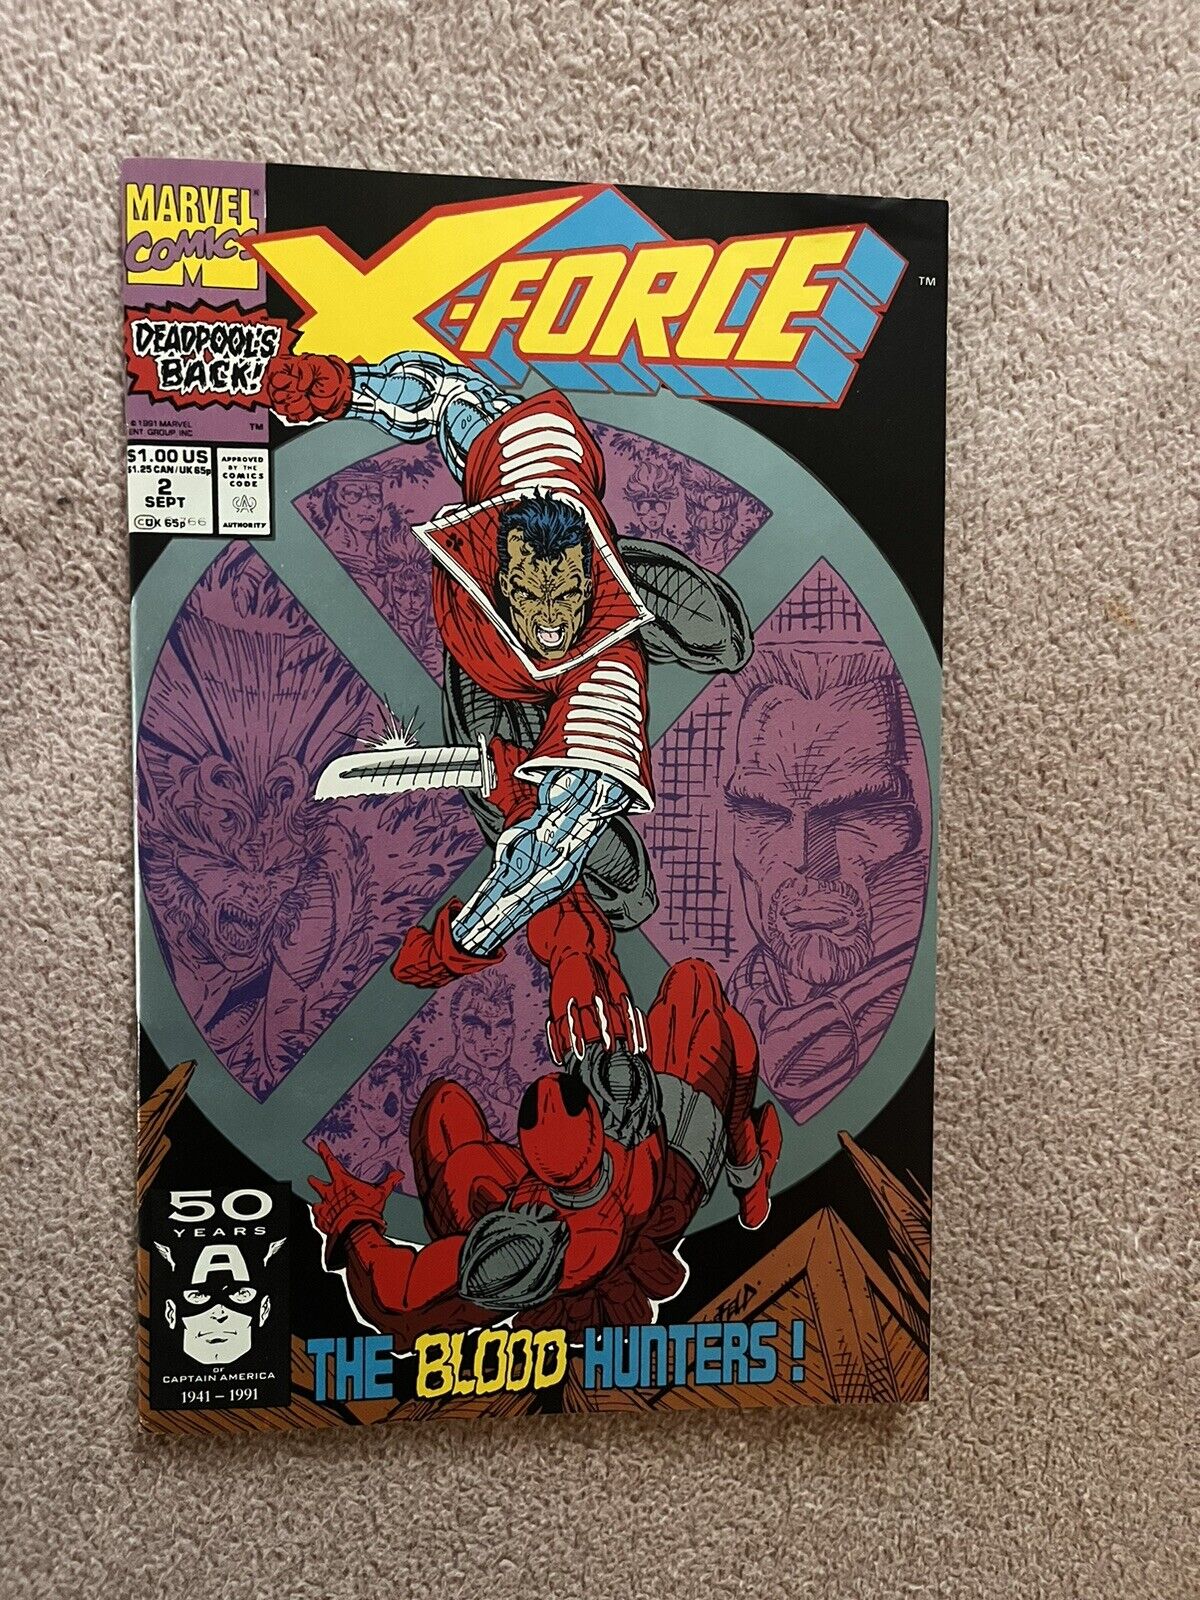 X-FORCE #2, (VF/NM), 2nd App. of Deadpool, Rob Liefeld, Marvel 1991